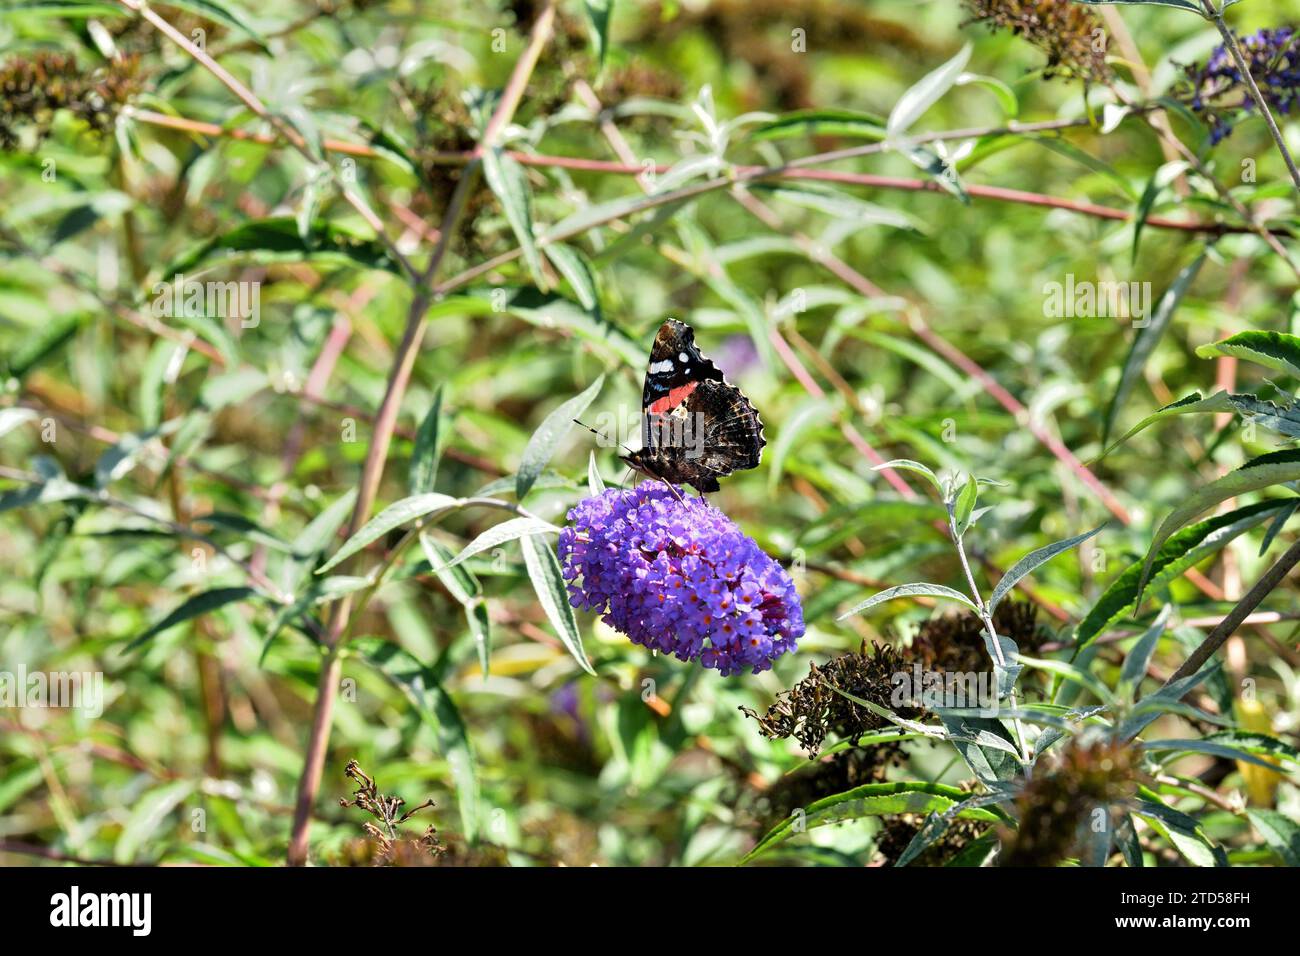 European peacock butterfly fly in a meadow full of colorful flowers Stock Photo